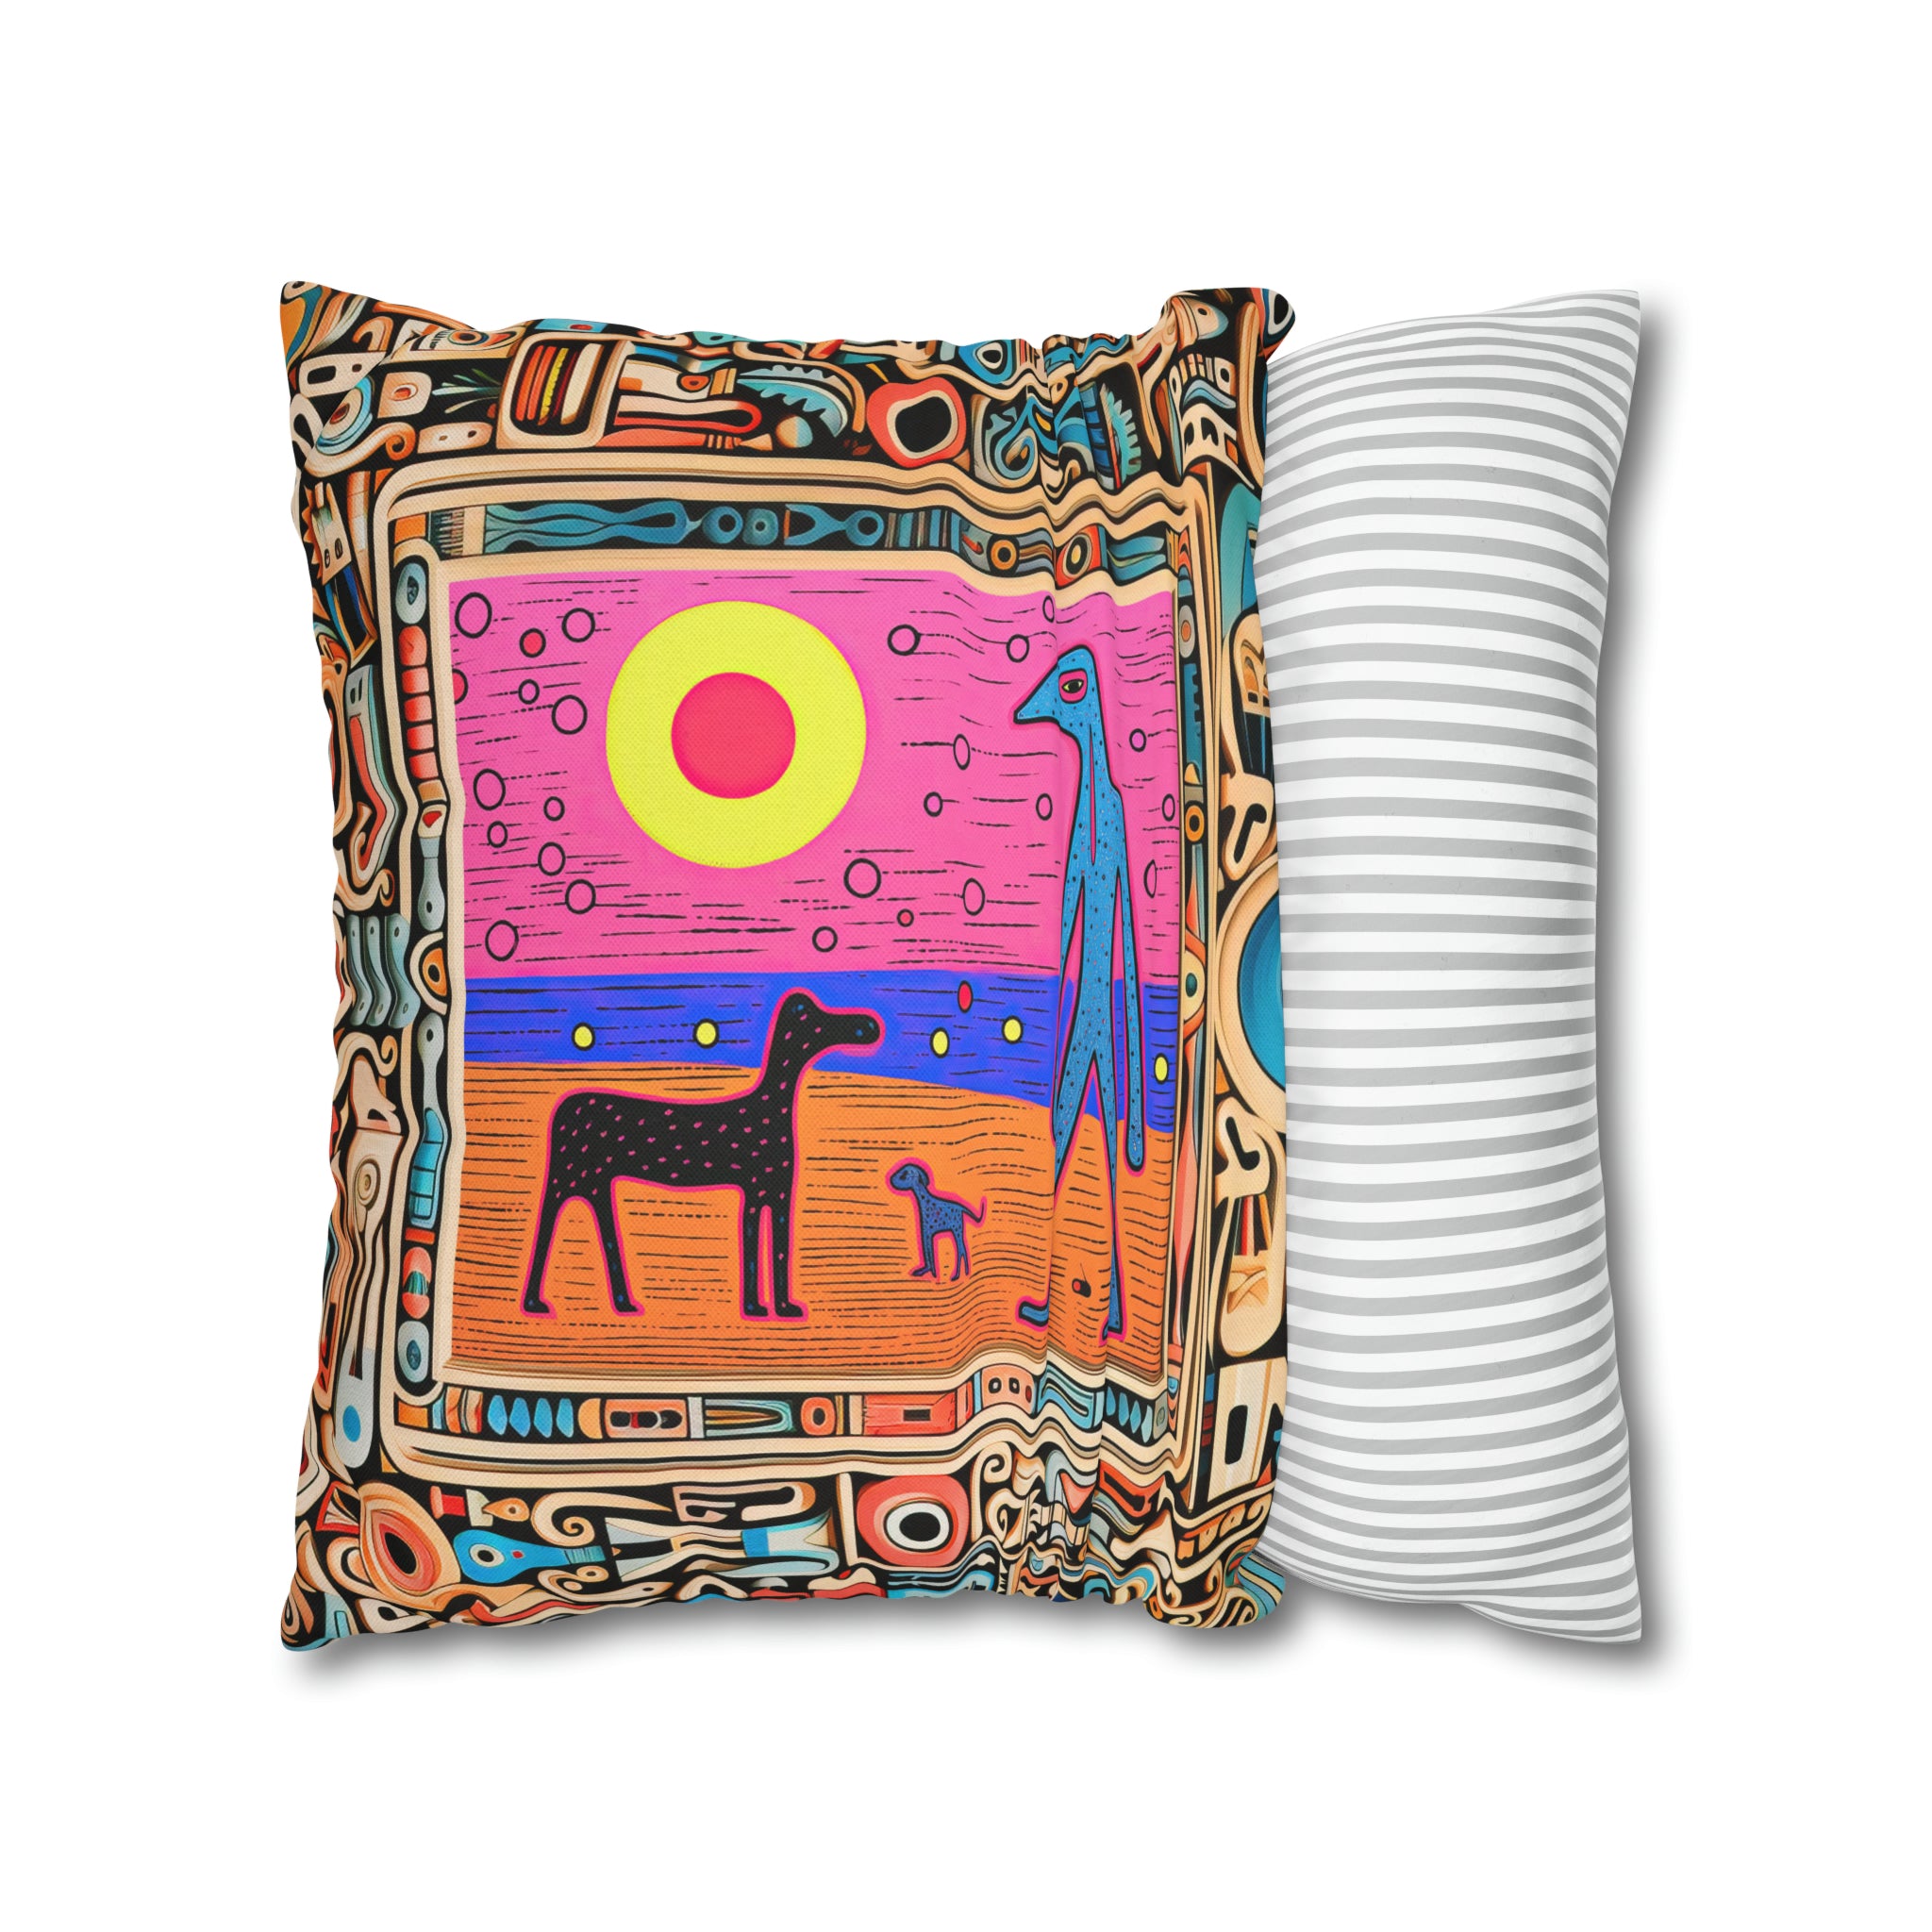 Square Pillow Case 18" x 18", CASE ONLY, no pillow form, original Pop Art Style, Blue Alien on the beach with his Dogs, Framed